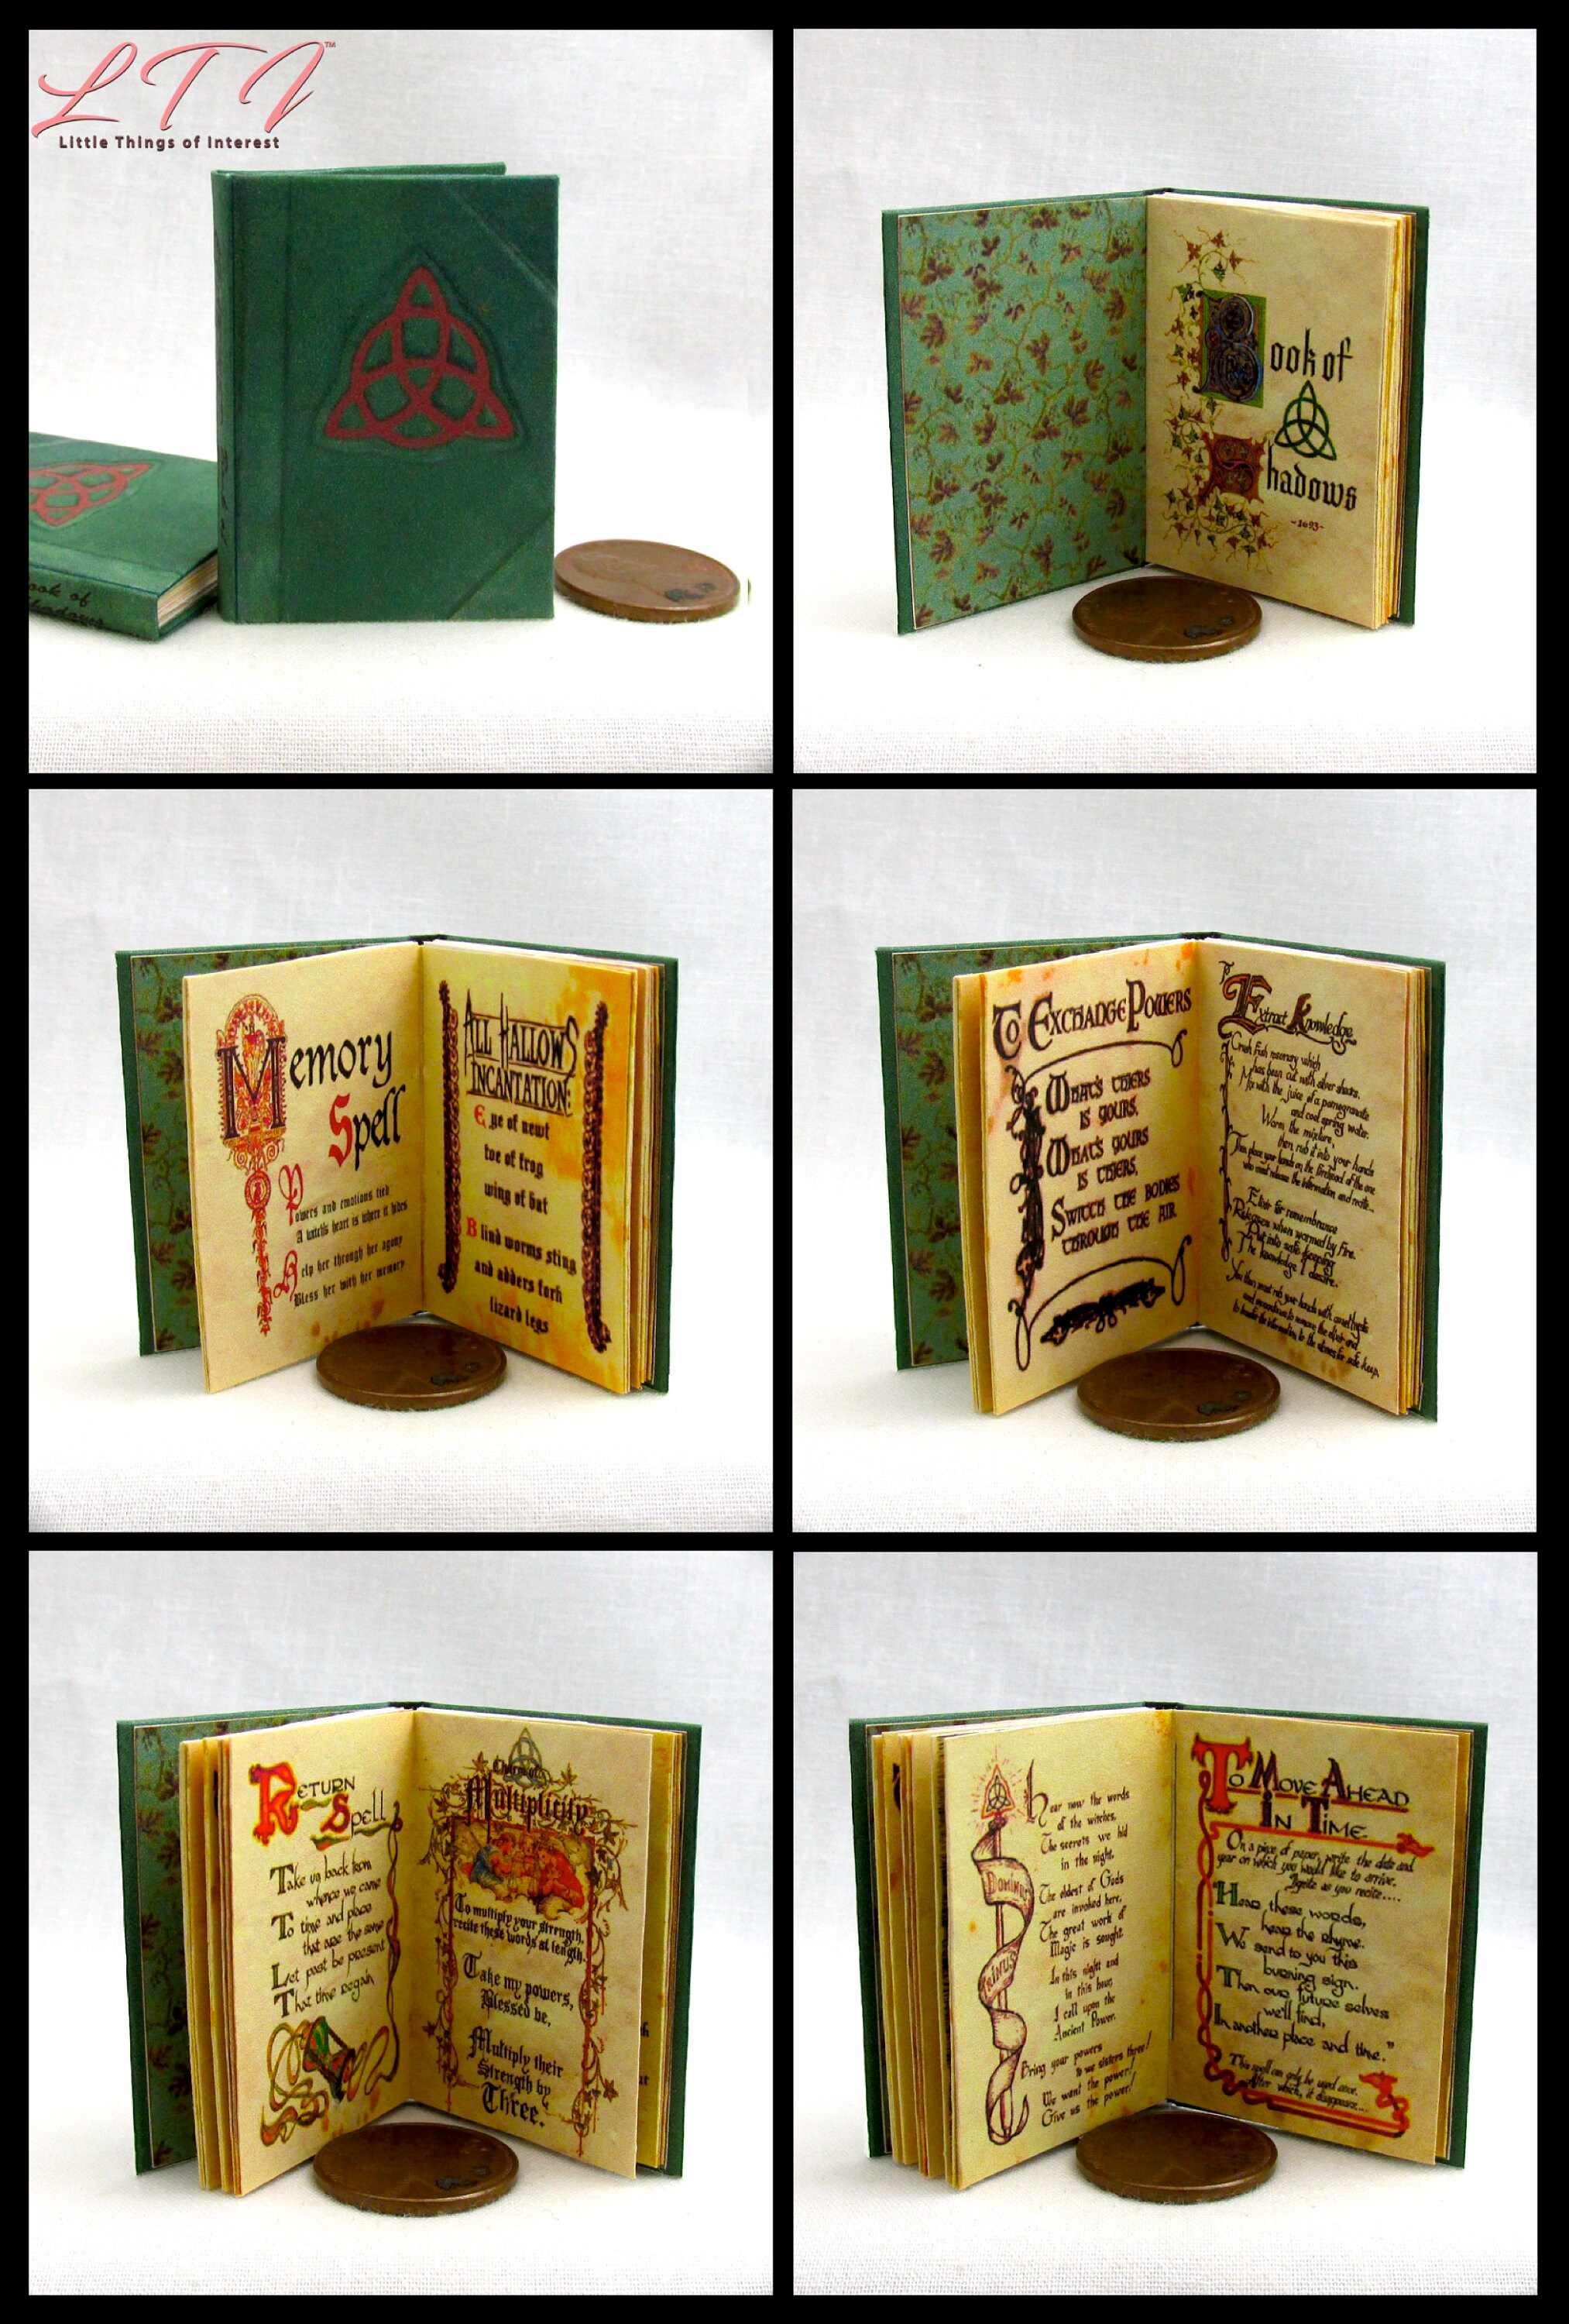 THE BOOK OF SHADOWS Magic Spell Book Miniature Playscale Readable  Illustrated Book [H3 1:6 Scale12] - $10.80 : Little THINGS of Interest,  Miniature Books and Accessories